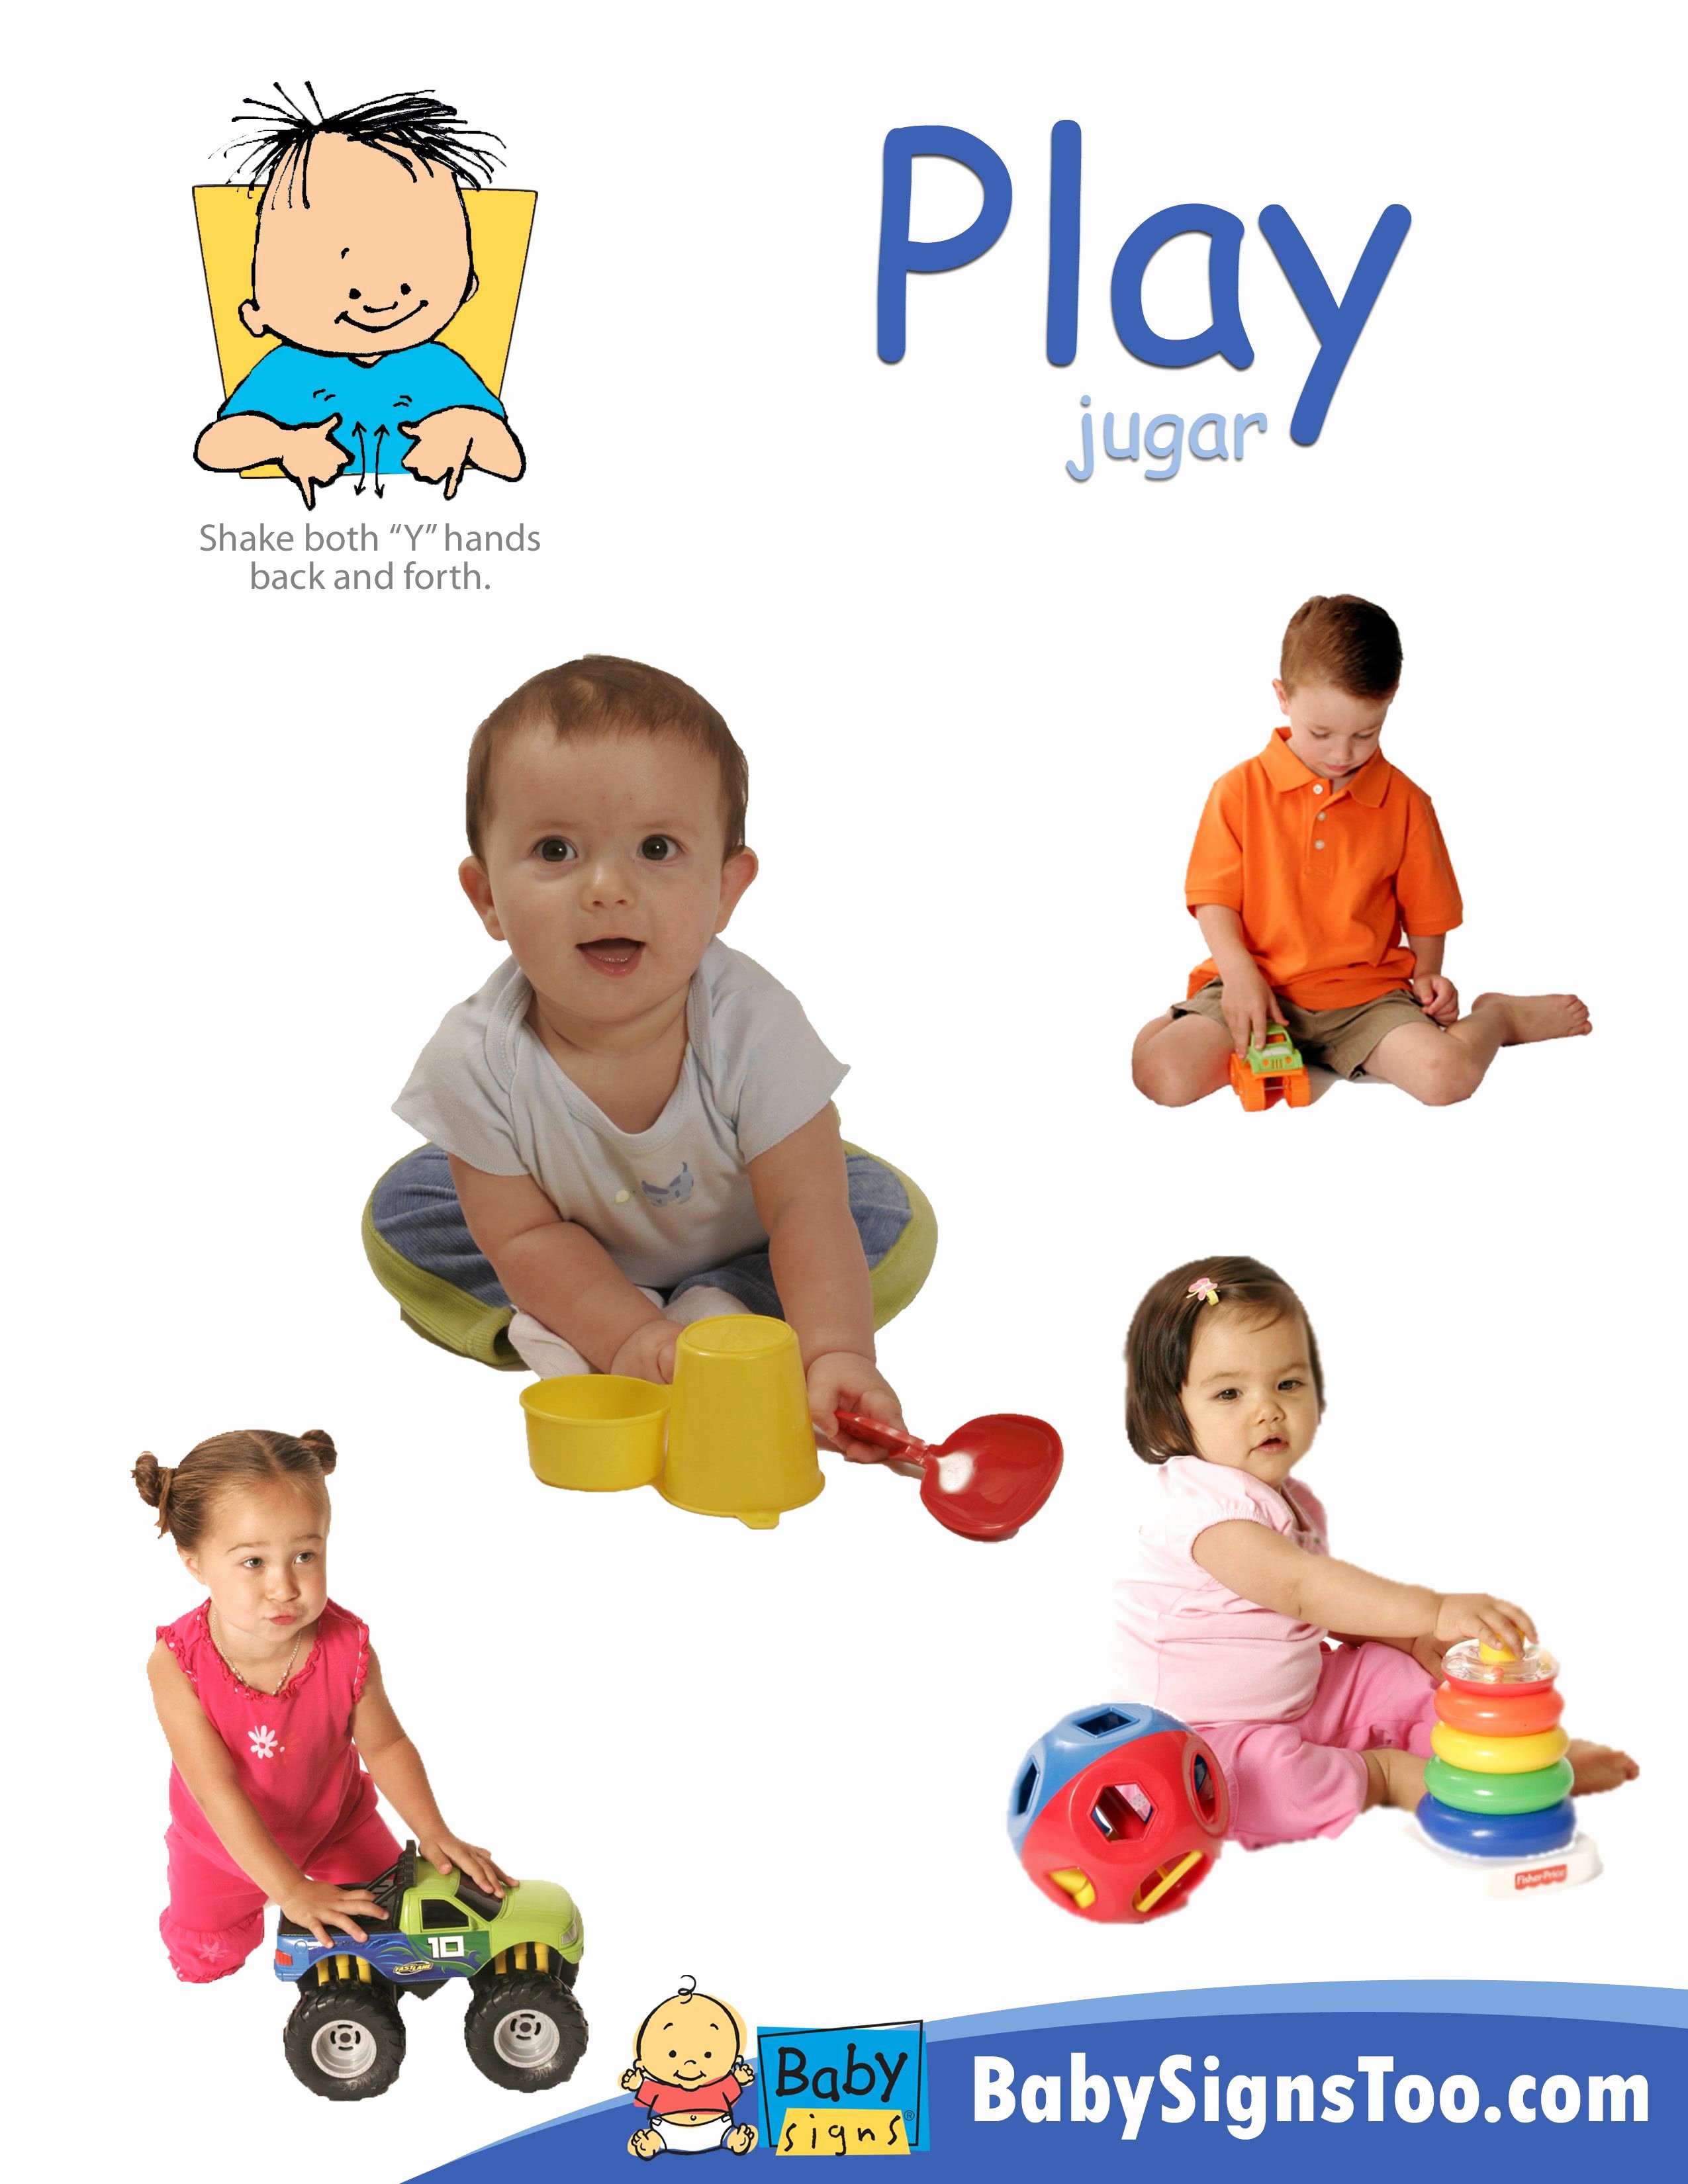 Baby Sign Language Posters New Free Printable Poster with the Sign for Play Babysigns